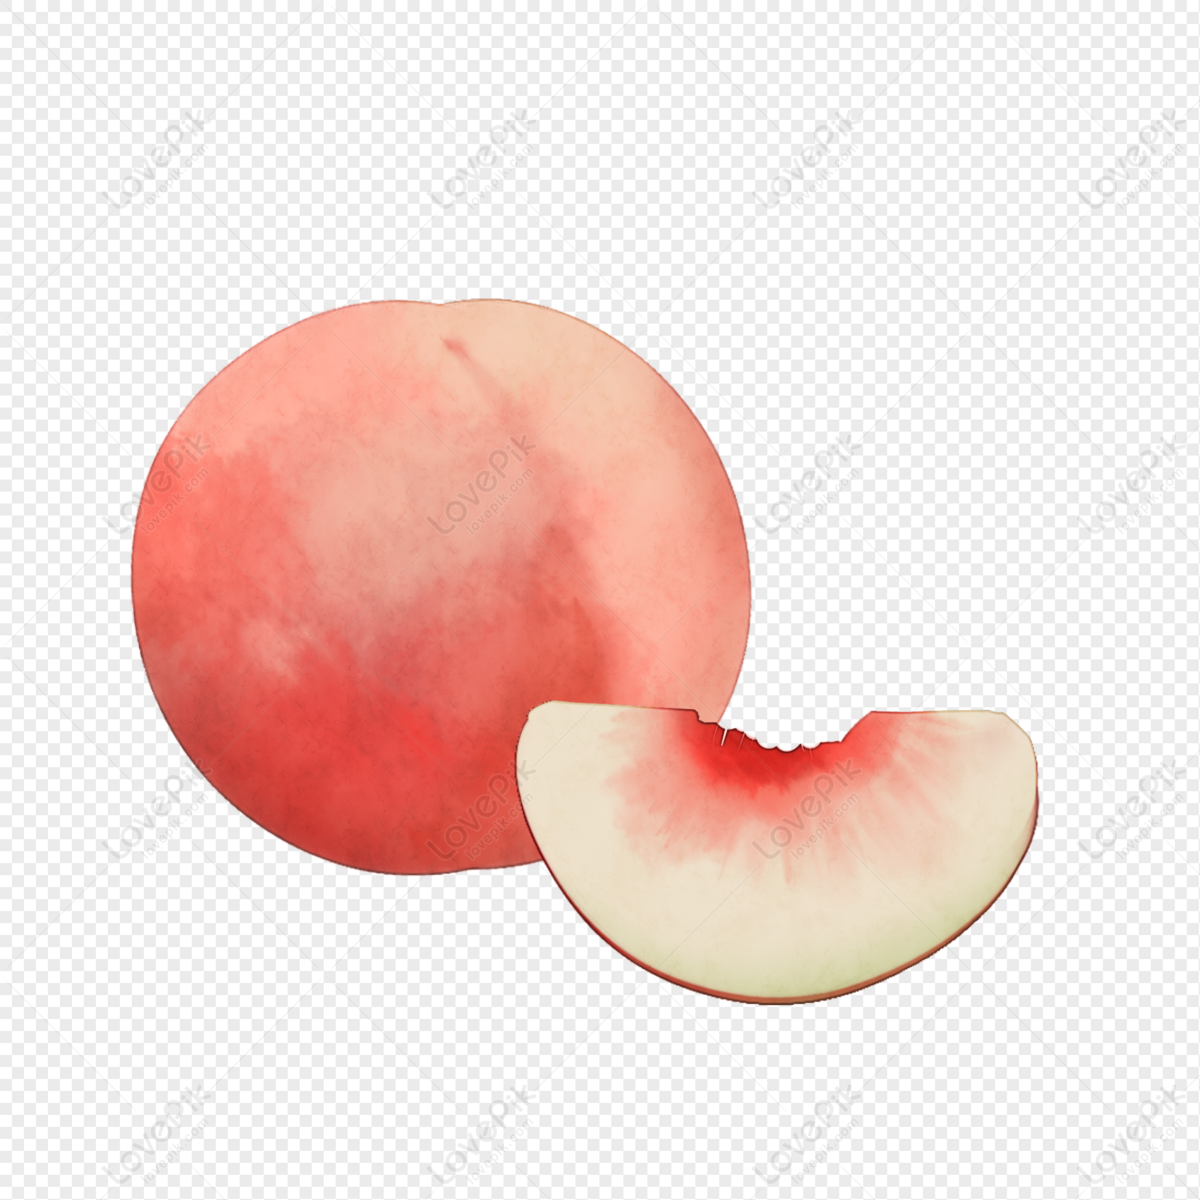 Cartoon Peach Images, HD Pictures For Free Vectors Download 